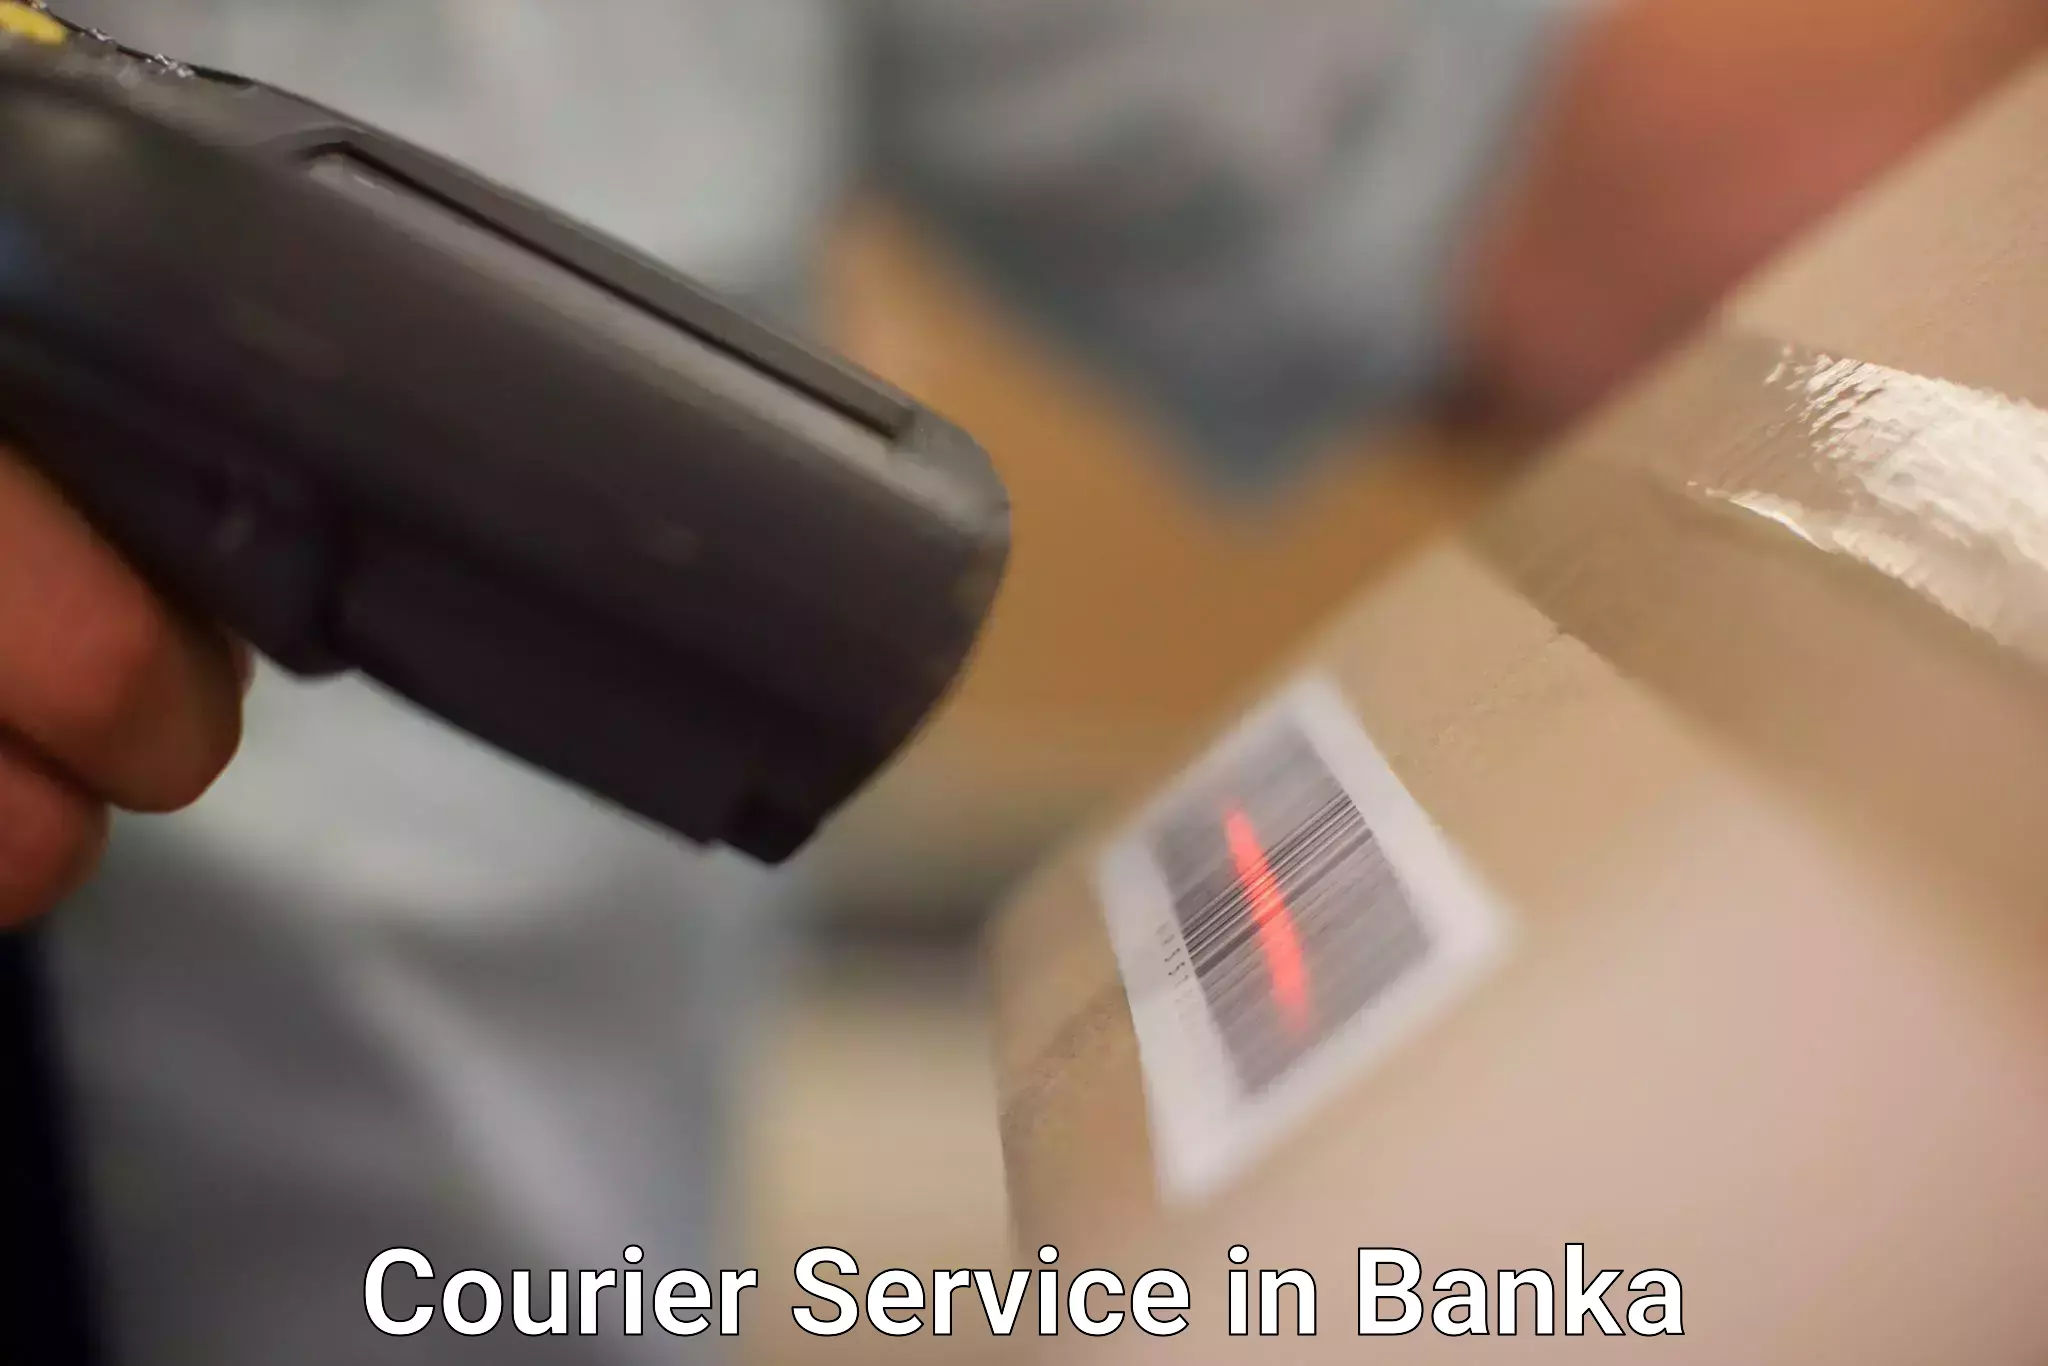 Personal courier services in Banka